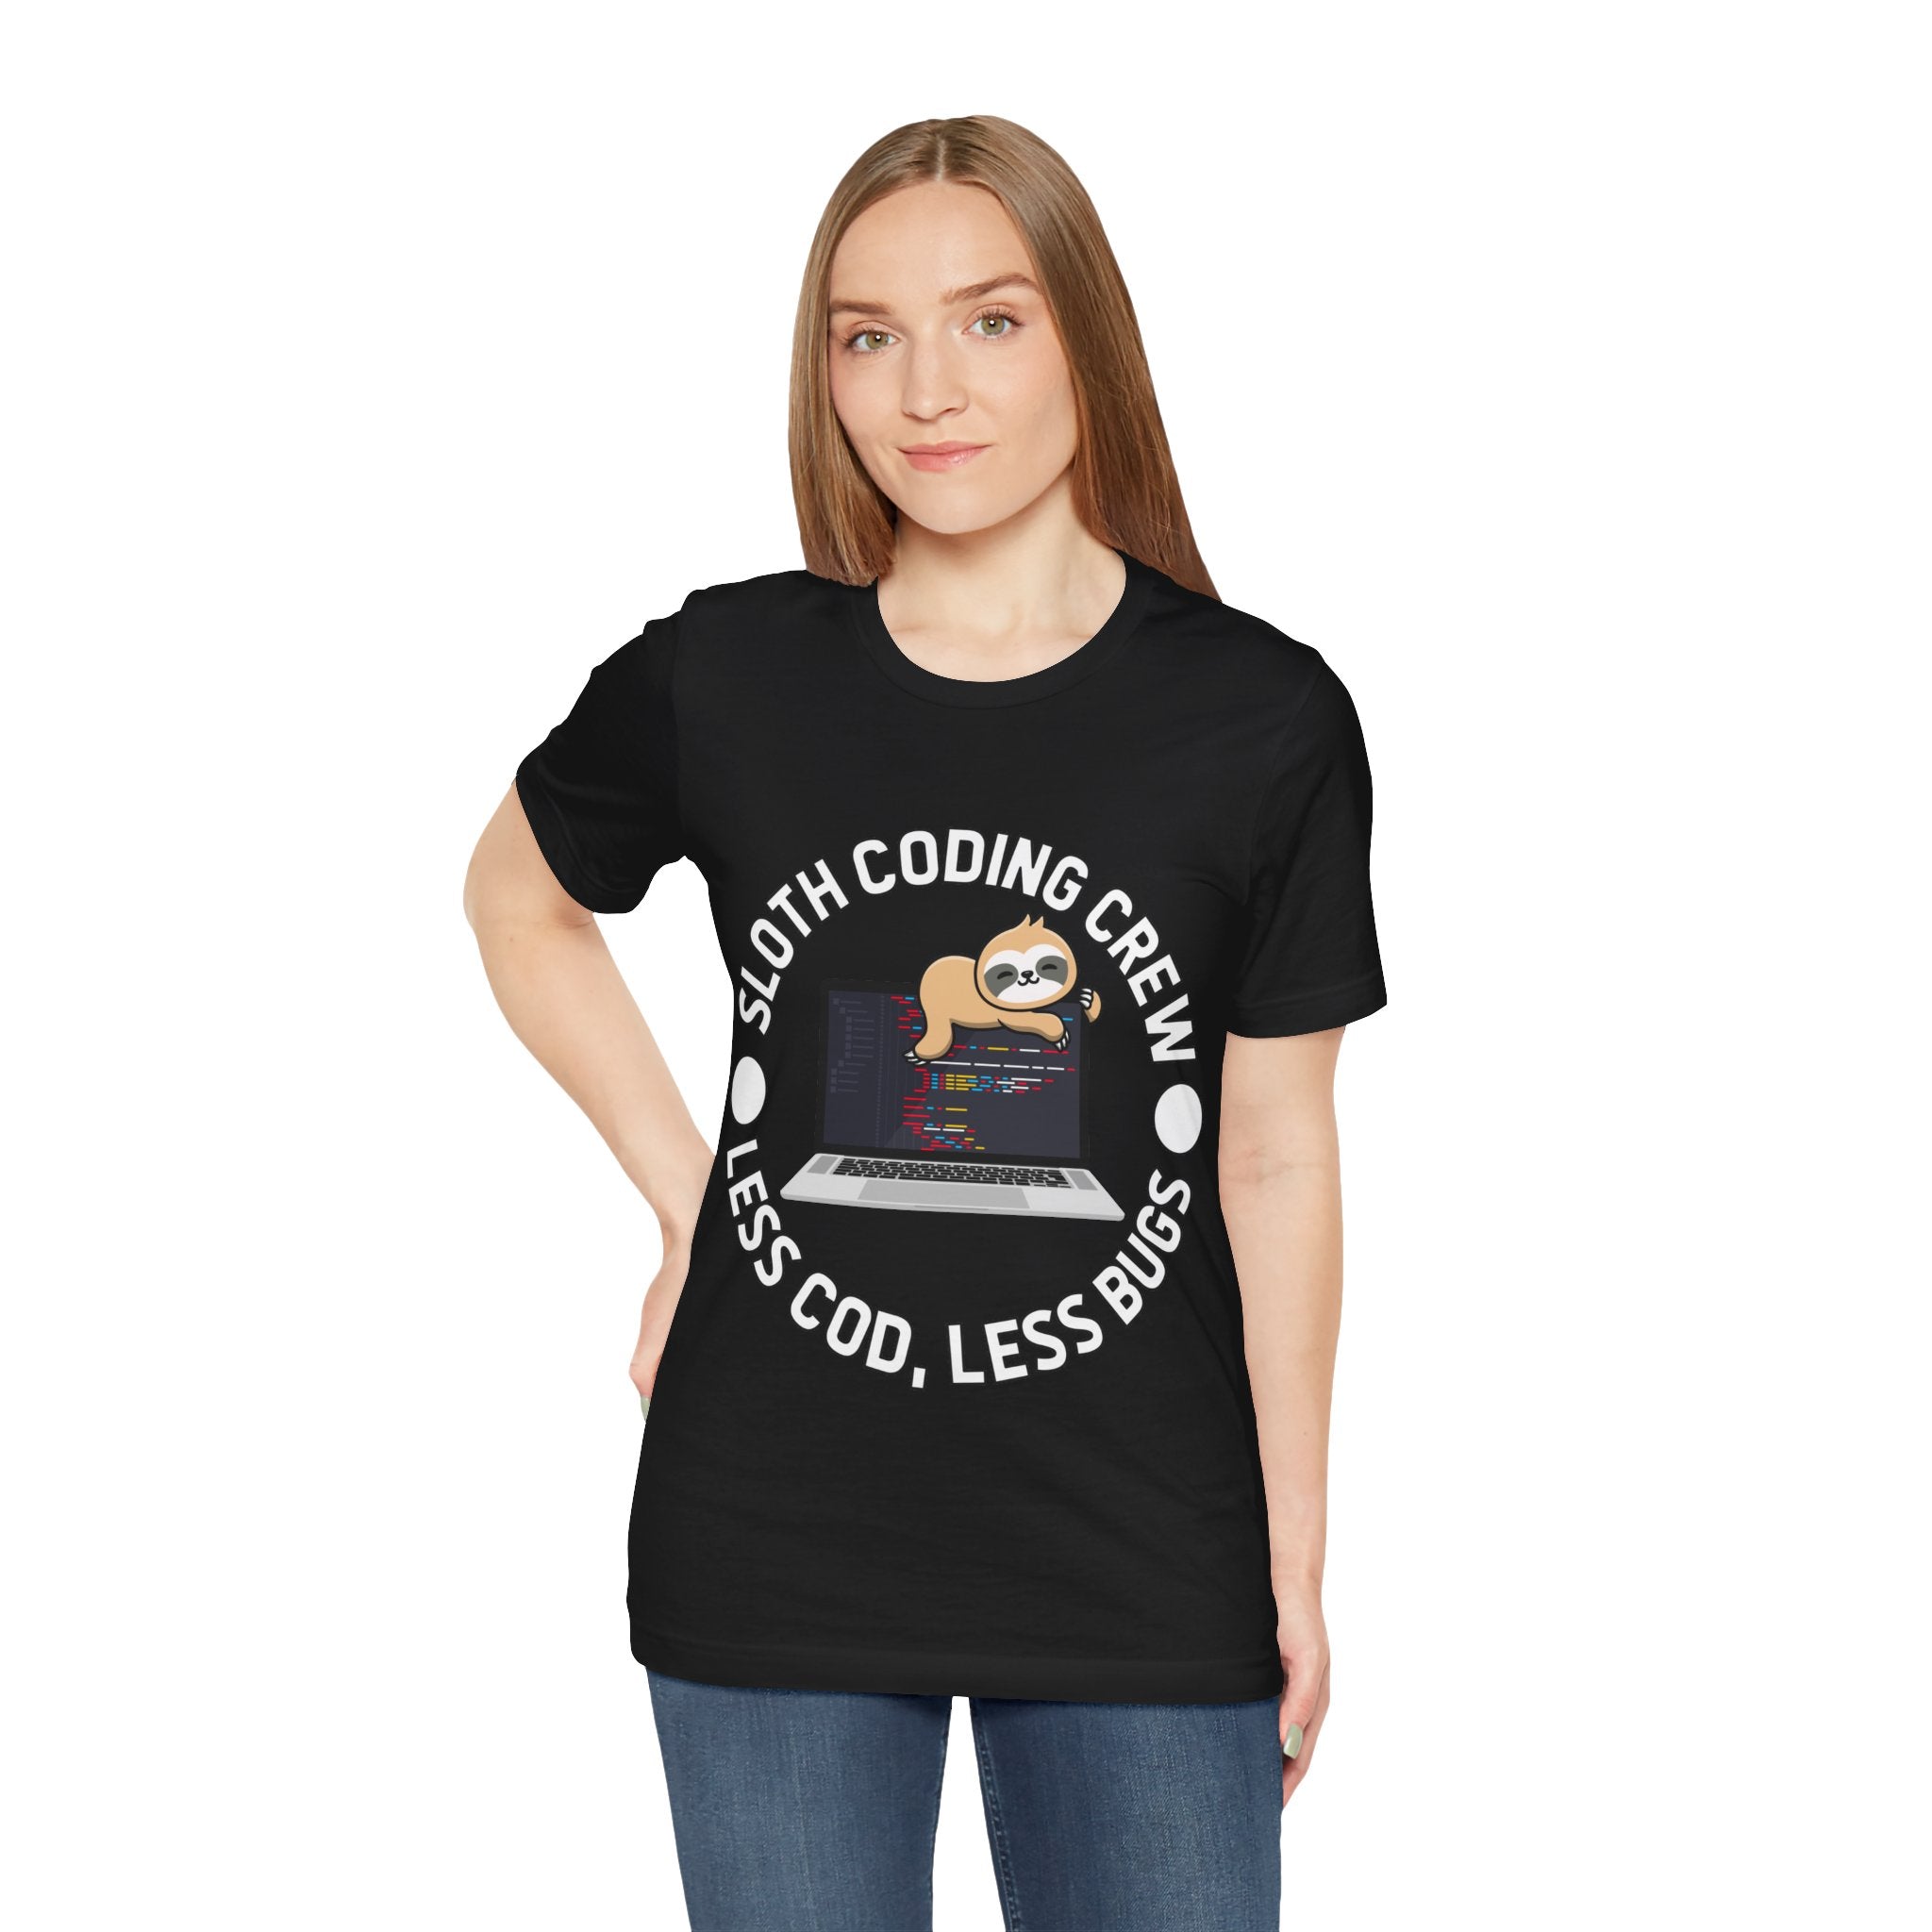 Young woman wearing a black unisex jersey tee with a "Sloth Coding Crew Less Cod Less Bugs" graphic, featuring a cartoon sloth on a laptop.